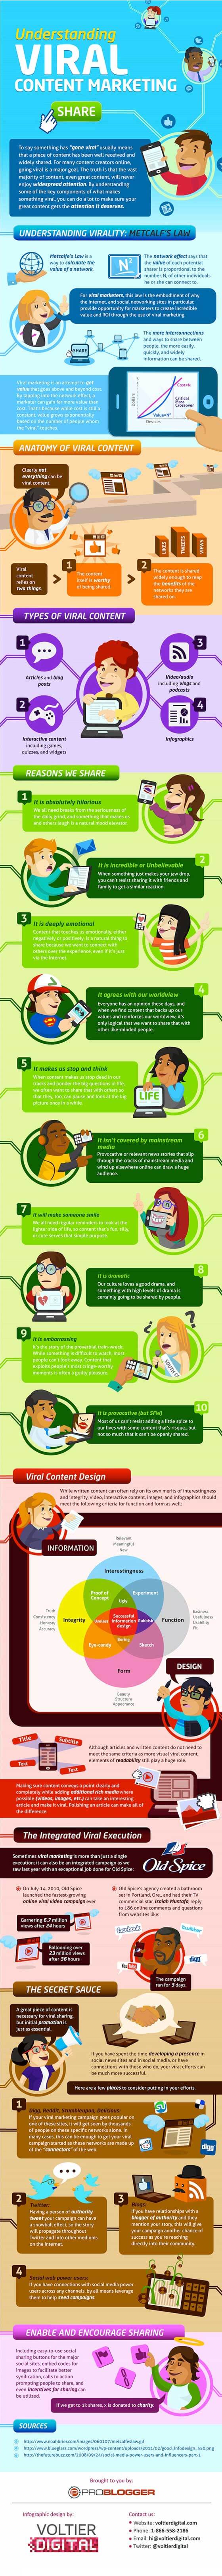 Viral content marketing infographic